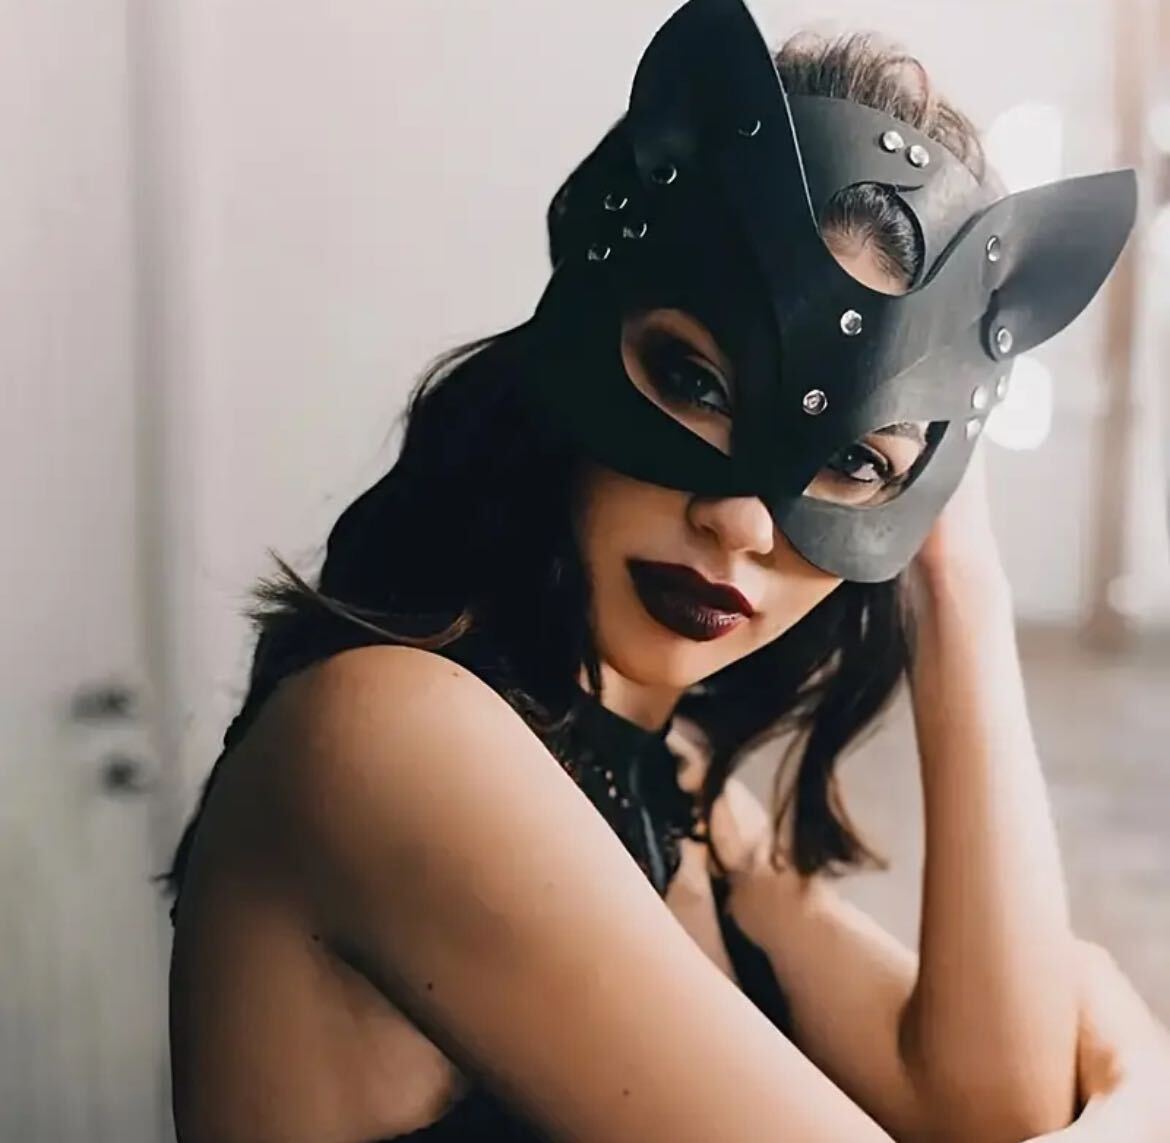  leather cat mask face mask black cat mask PU leather cosplay 